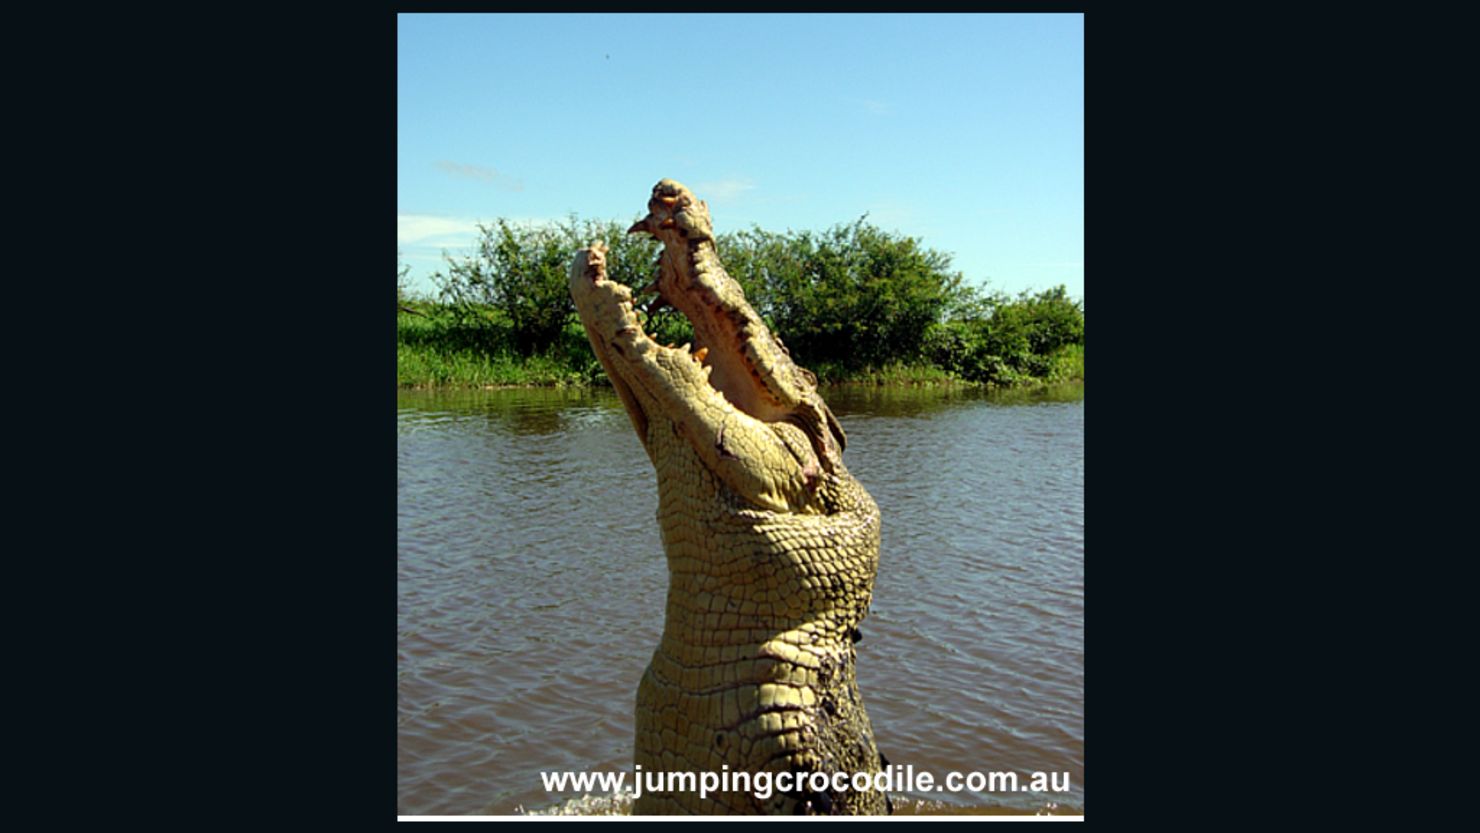 Saltwater crocodile "Michael Jackson" on Australia's Adelaide River. Picture courtesy of Spectacular Jumping Crocodile Cruise.